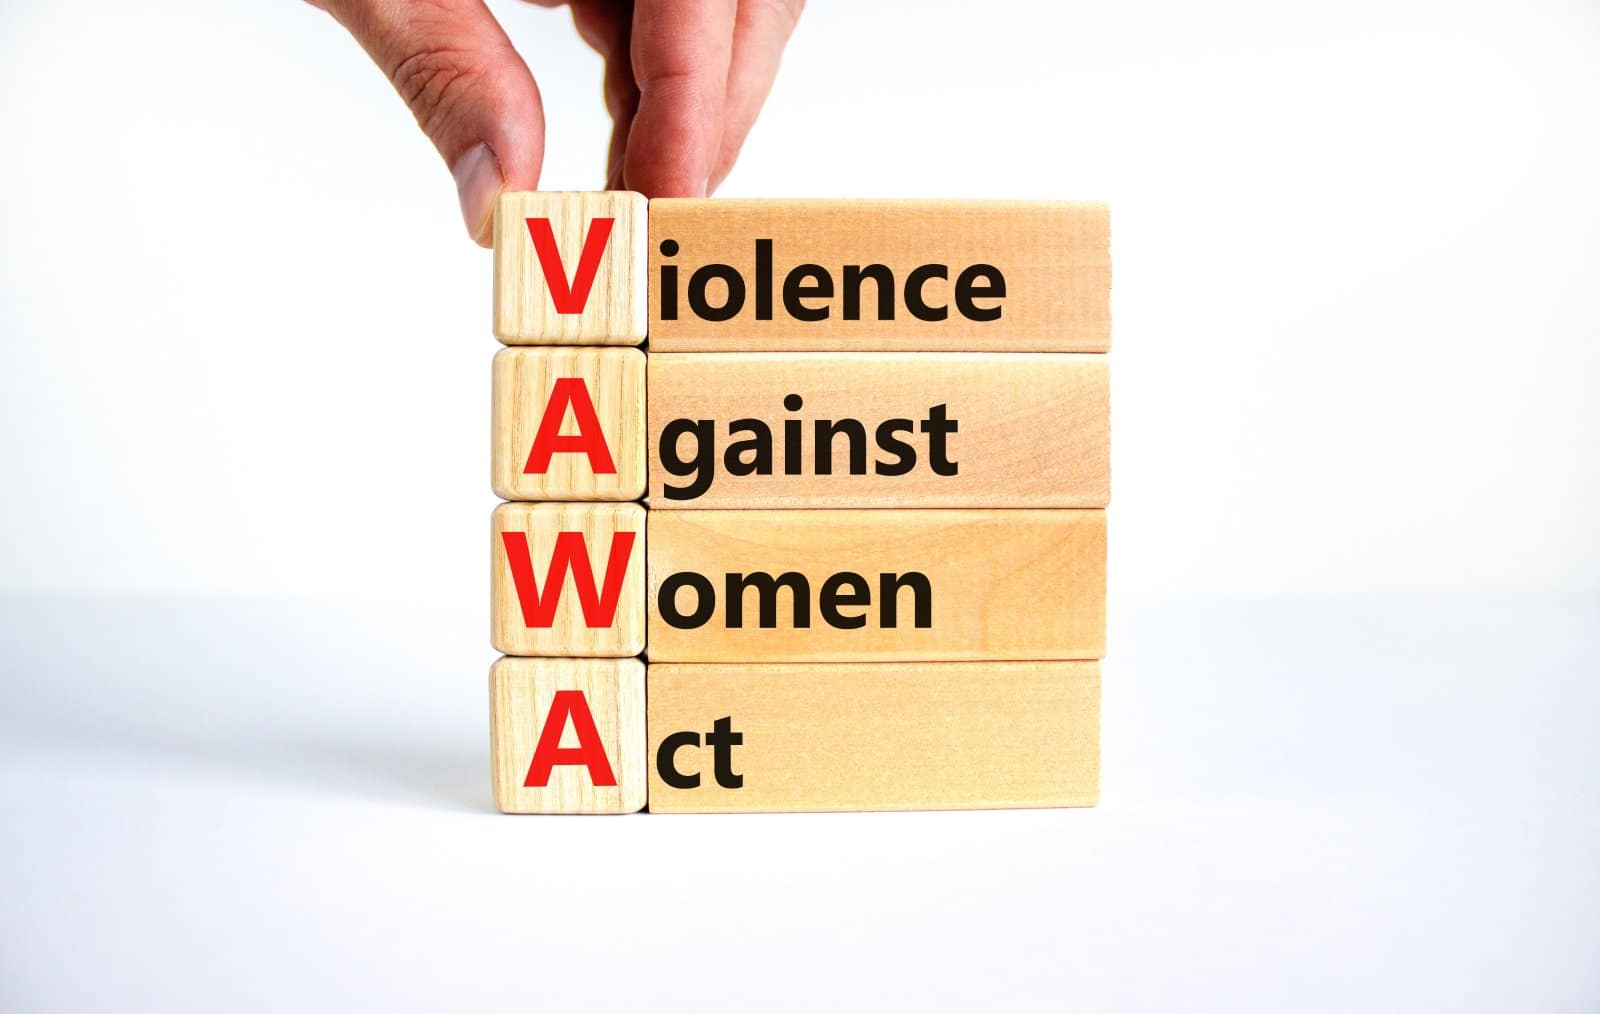 Image Credit: Shutterstock / Dmitry Demidovich <p><span>The Violence Against Women Act (VAWA) was enacted to address domestic violence, dating violence, sexual assault, and stalking, providing resources and support for survivors while promoting prevention efforts and holding perpetrators accountable, thus advancing women’s rights to safety and justice.</span></p> <p><span>Through these legal landmarks, the fight for women’s rights has been strengthened, paving the way for greater equality, opportunity, and justice for women in the United States.</span></p> <p><span>The post <a href="https://pulseofpride.com/milestones-shaping-womens-rights-in-america/">A Journey of Equality – Legal Milestones Shaping Women’s Rights in America</a> first appeared on </span><a href="https://pulseofpride.com/"><span>Pulse of Pride</span></a><span>.</span></p> <p><span>Featured Image Credit: Shutterstock / Jacob Lund.</span></p> <p><span>For transparency, this content was partly developed with AI assistance and carefully curated by an experienced editor to be informative and ensure accuracy.</span></p>